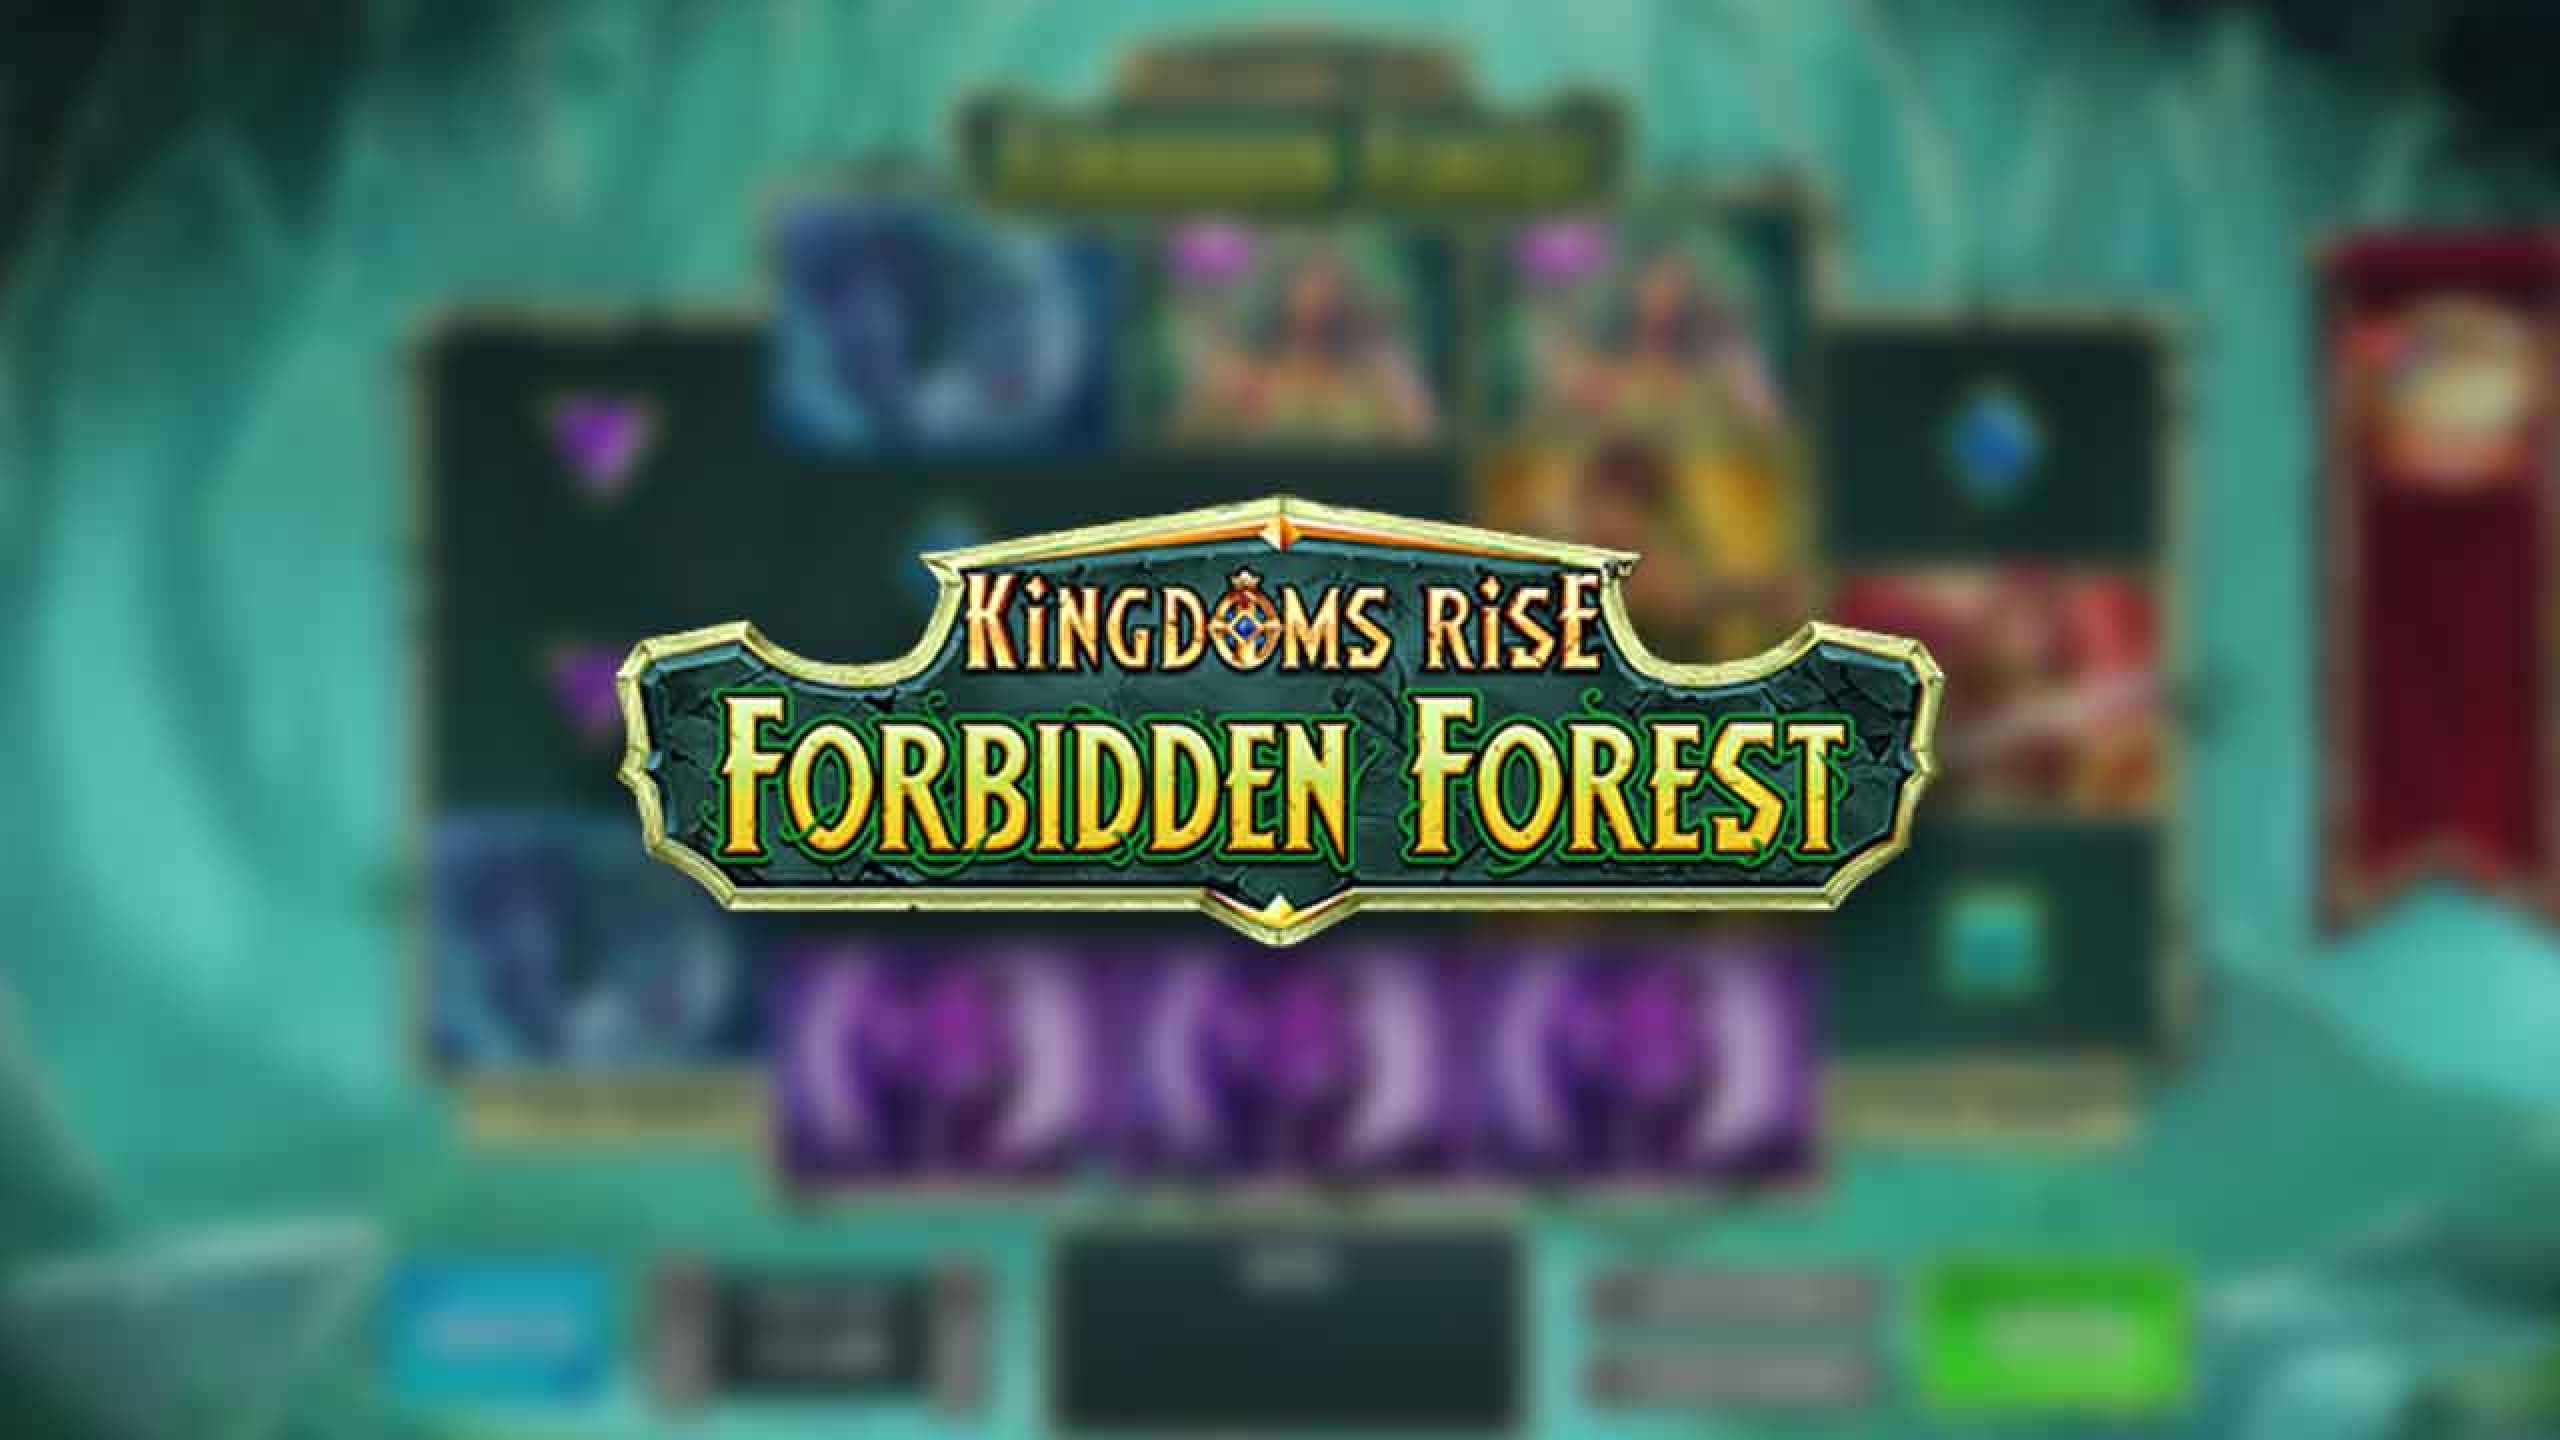 The Kingdoms Rise: Forbidden Forest Online Slot Demo Game by Playtech Origins